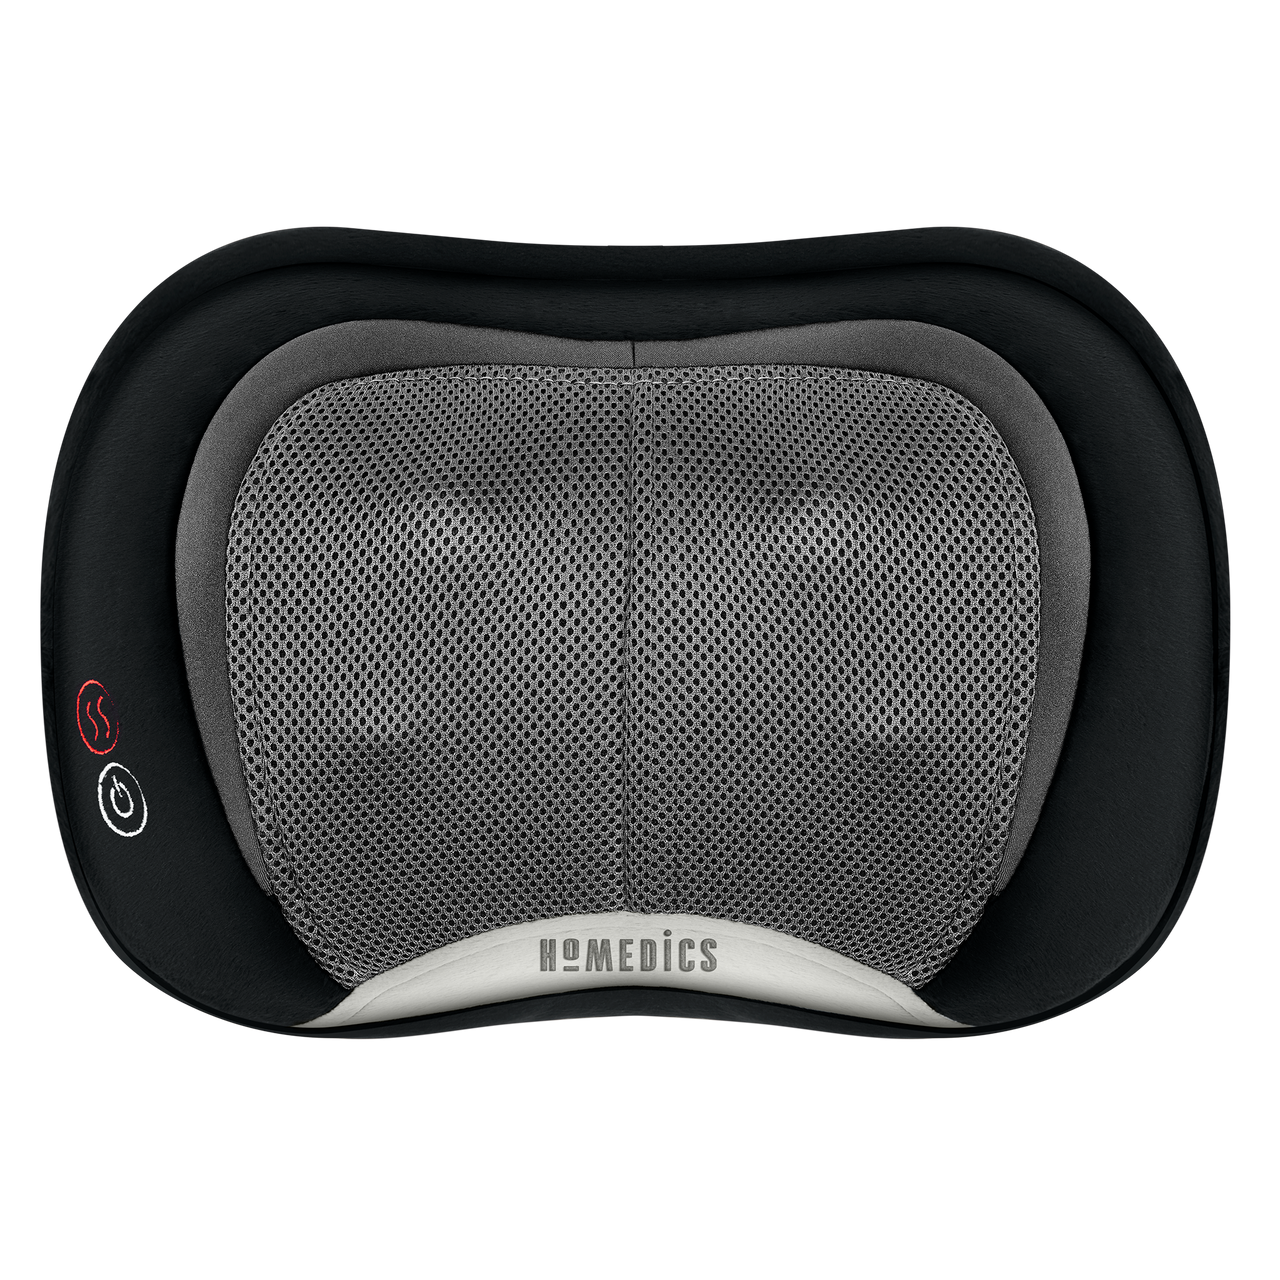  HoMedics Cordless Shiatsu Neck and Shoulder Massager with Heat,  Portable Deep Tissue Muscle Pain Relief for Back, Lumbar, Leg with 3  Professional Massage Programs : Health & Household